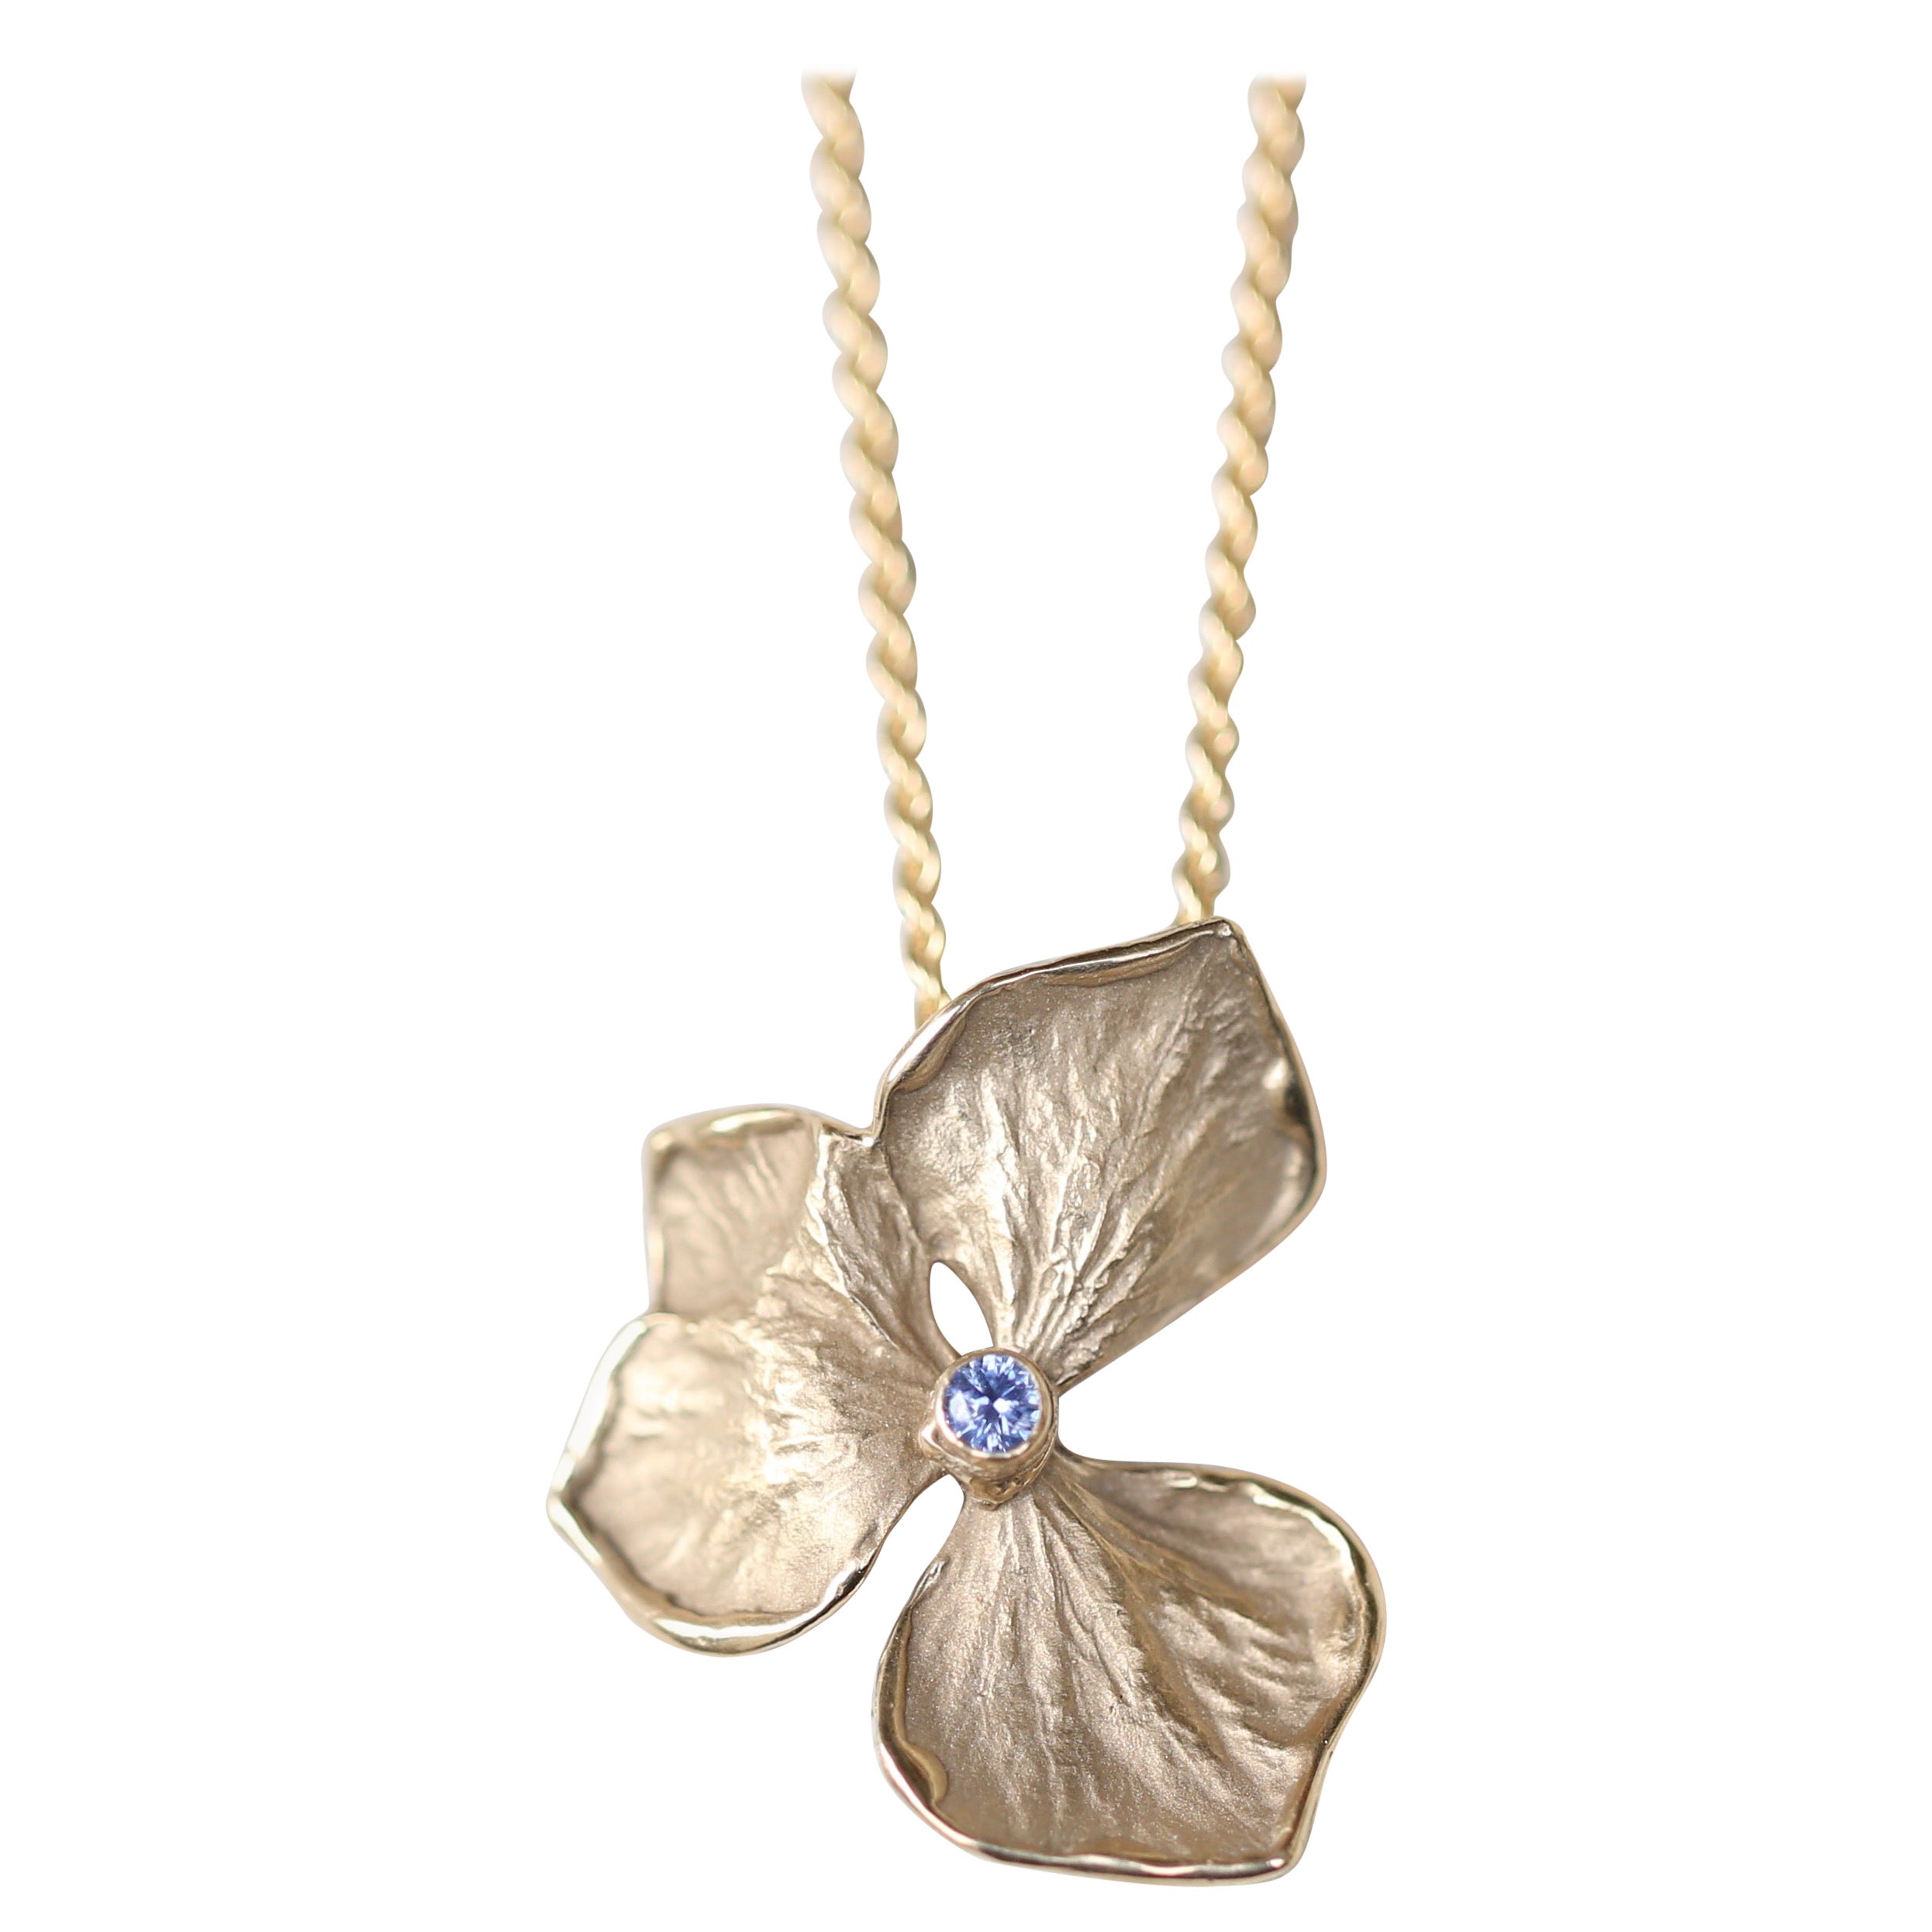 Large Solid Yellow Gold Hydrangea Flower Necklace

This unique pendant is made having a hydrangea flower as a source of inspiration. Each pendant is crafted in wax and then cast in gold.

Materials: Flower Pendant: Solid 14k Gold
Size approx: